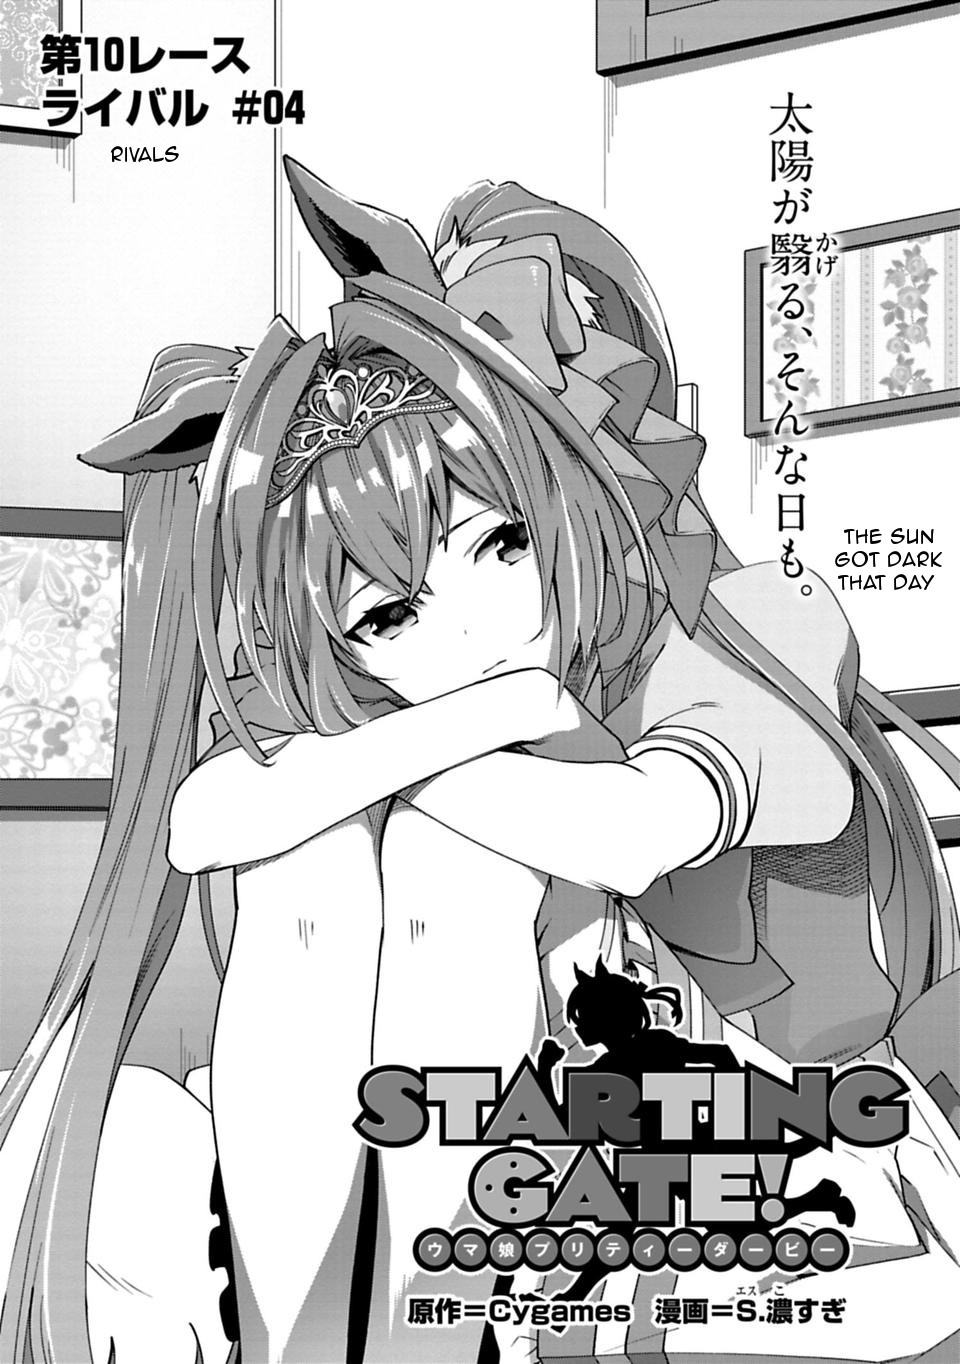 Starting Gate! Uma Musume Pretty Derby Vol.2 Chapter 10: Rivals 4 - Picture 1